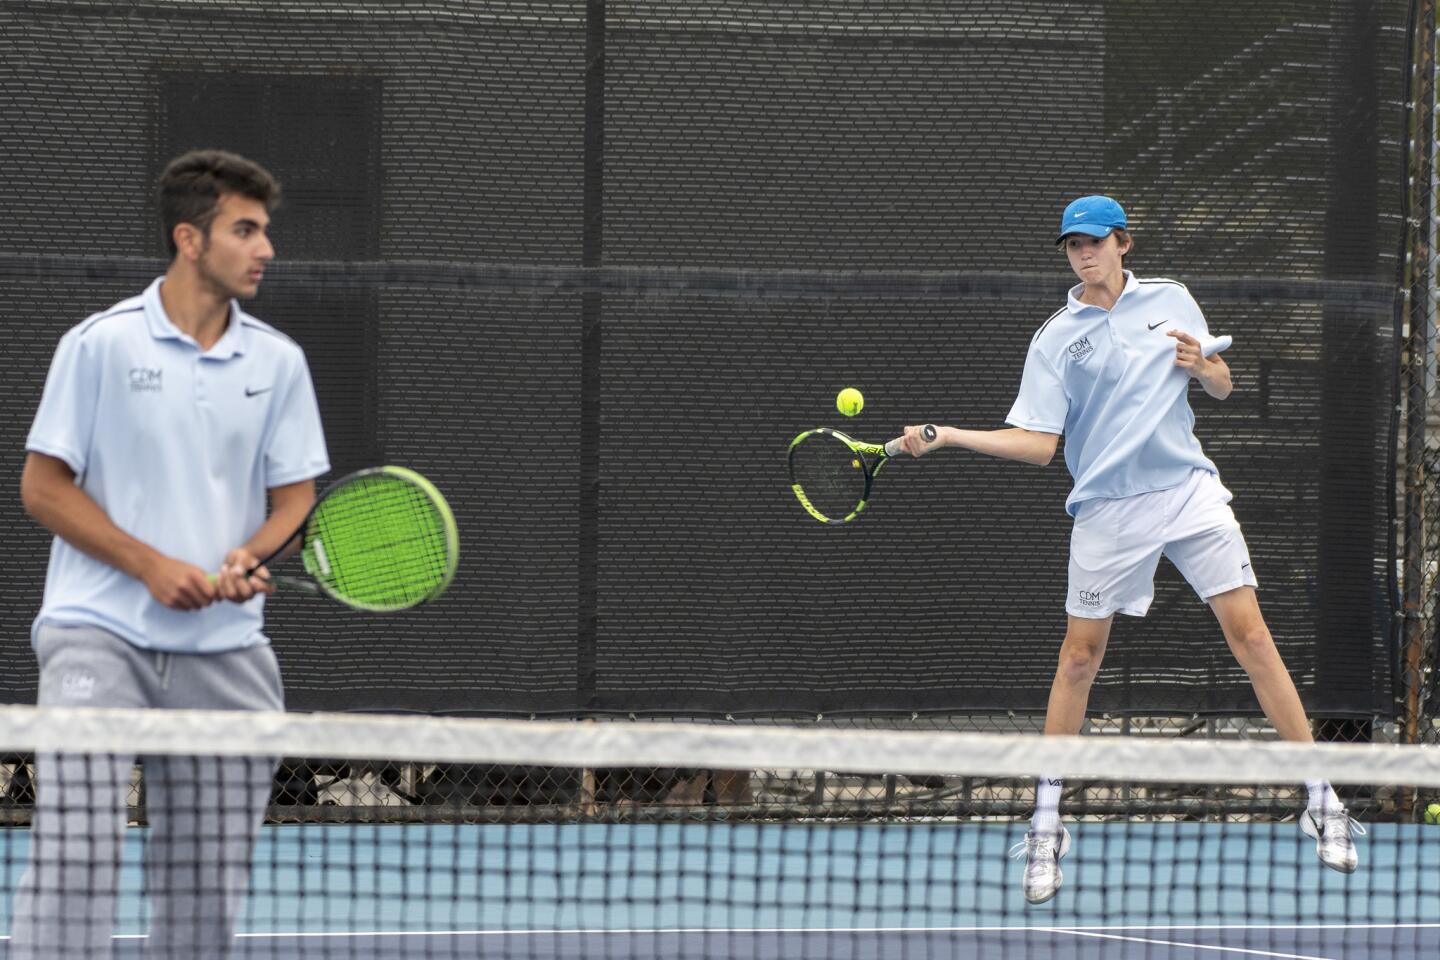 Photo Gallery: Sage Hill vs. Corona del Mar in CIF Southern Section Division 1 tennis match